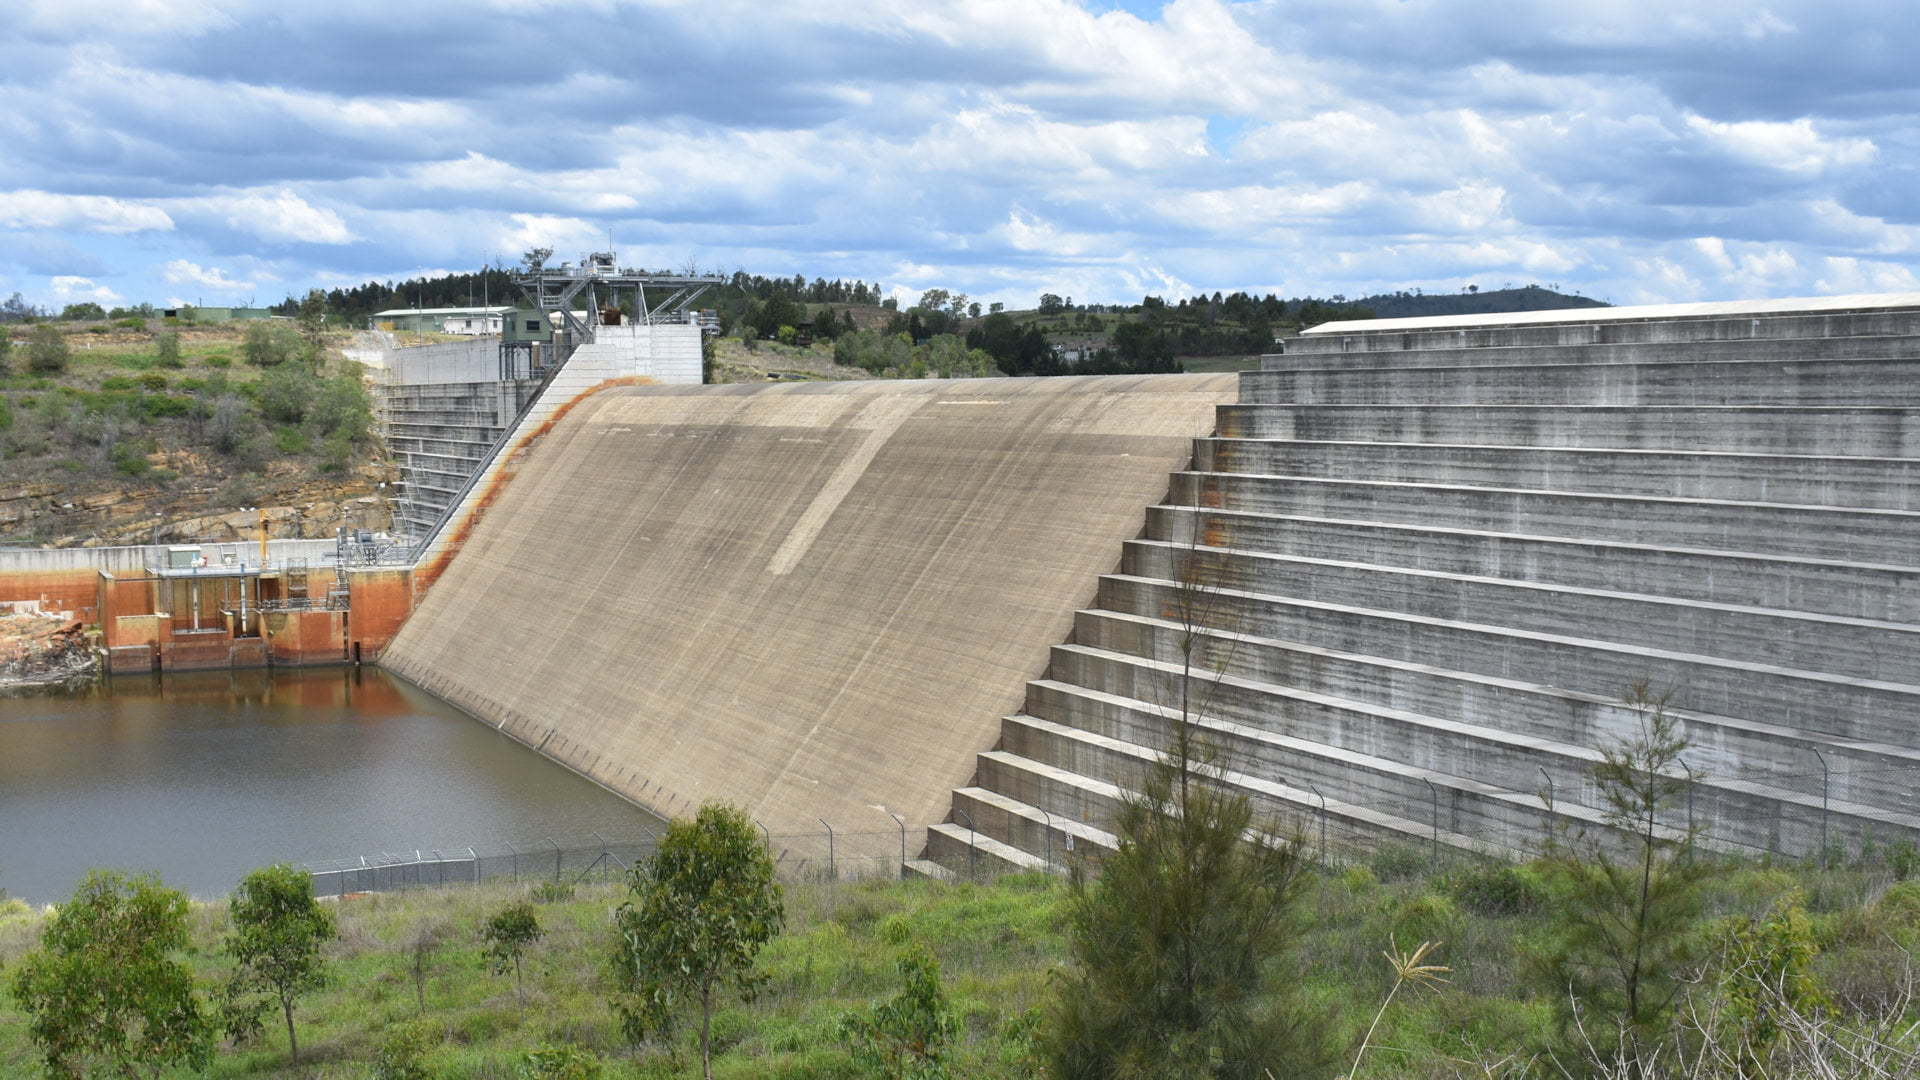 Ungated dam wall, at Wyaralong Dam from the mountain bike trail parking area